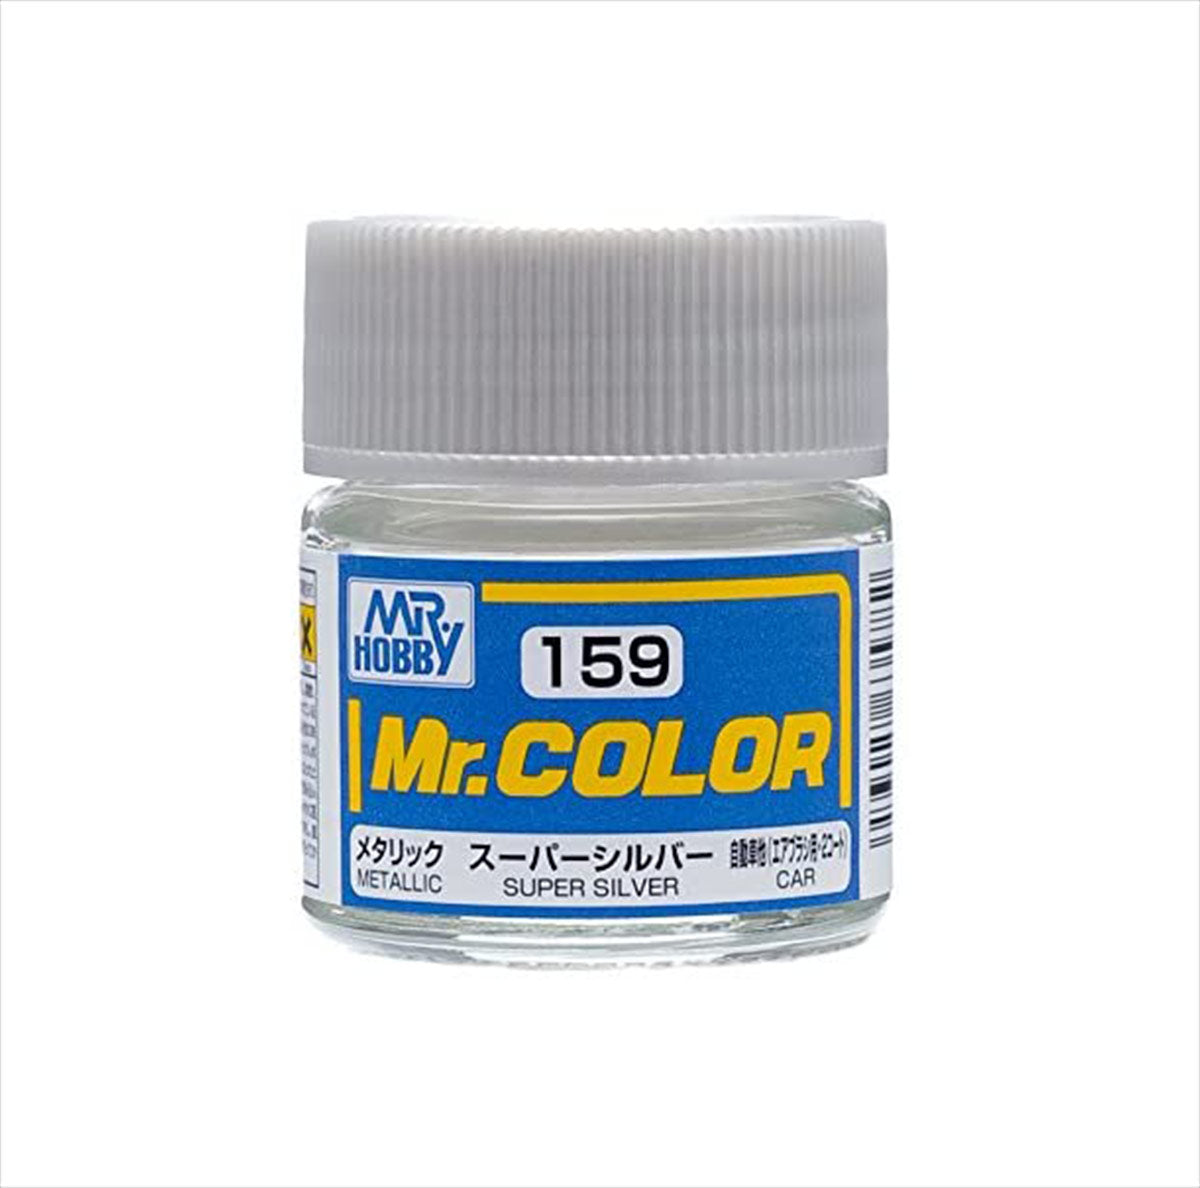 MR.COLOR LEVELING THINNER 400ML, Mr.COLOR, PAINT / THINNER / SPRAY